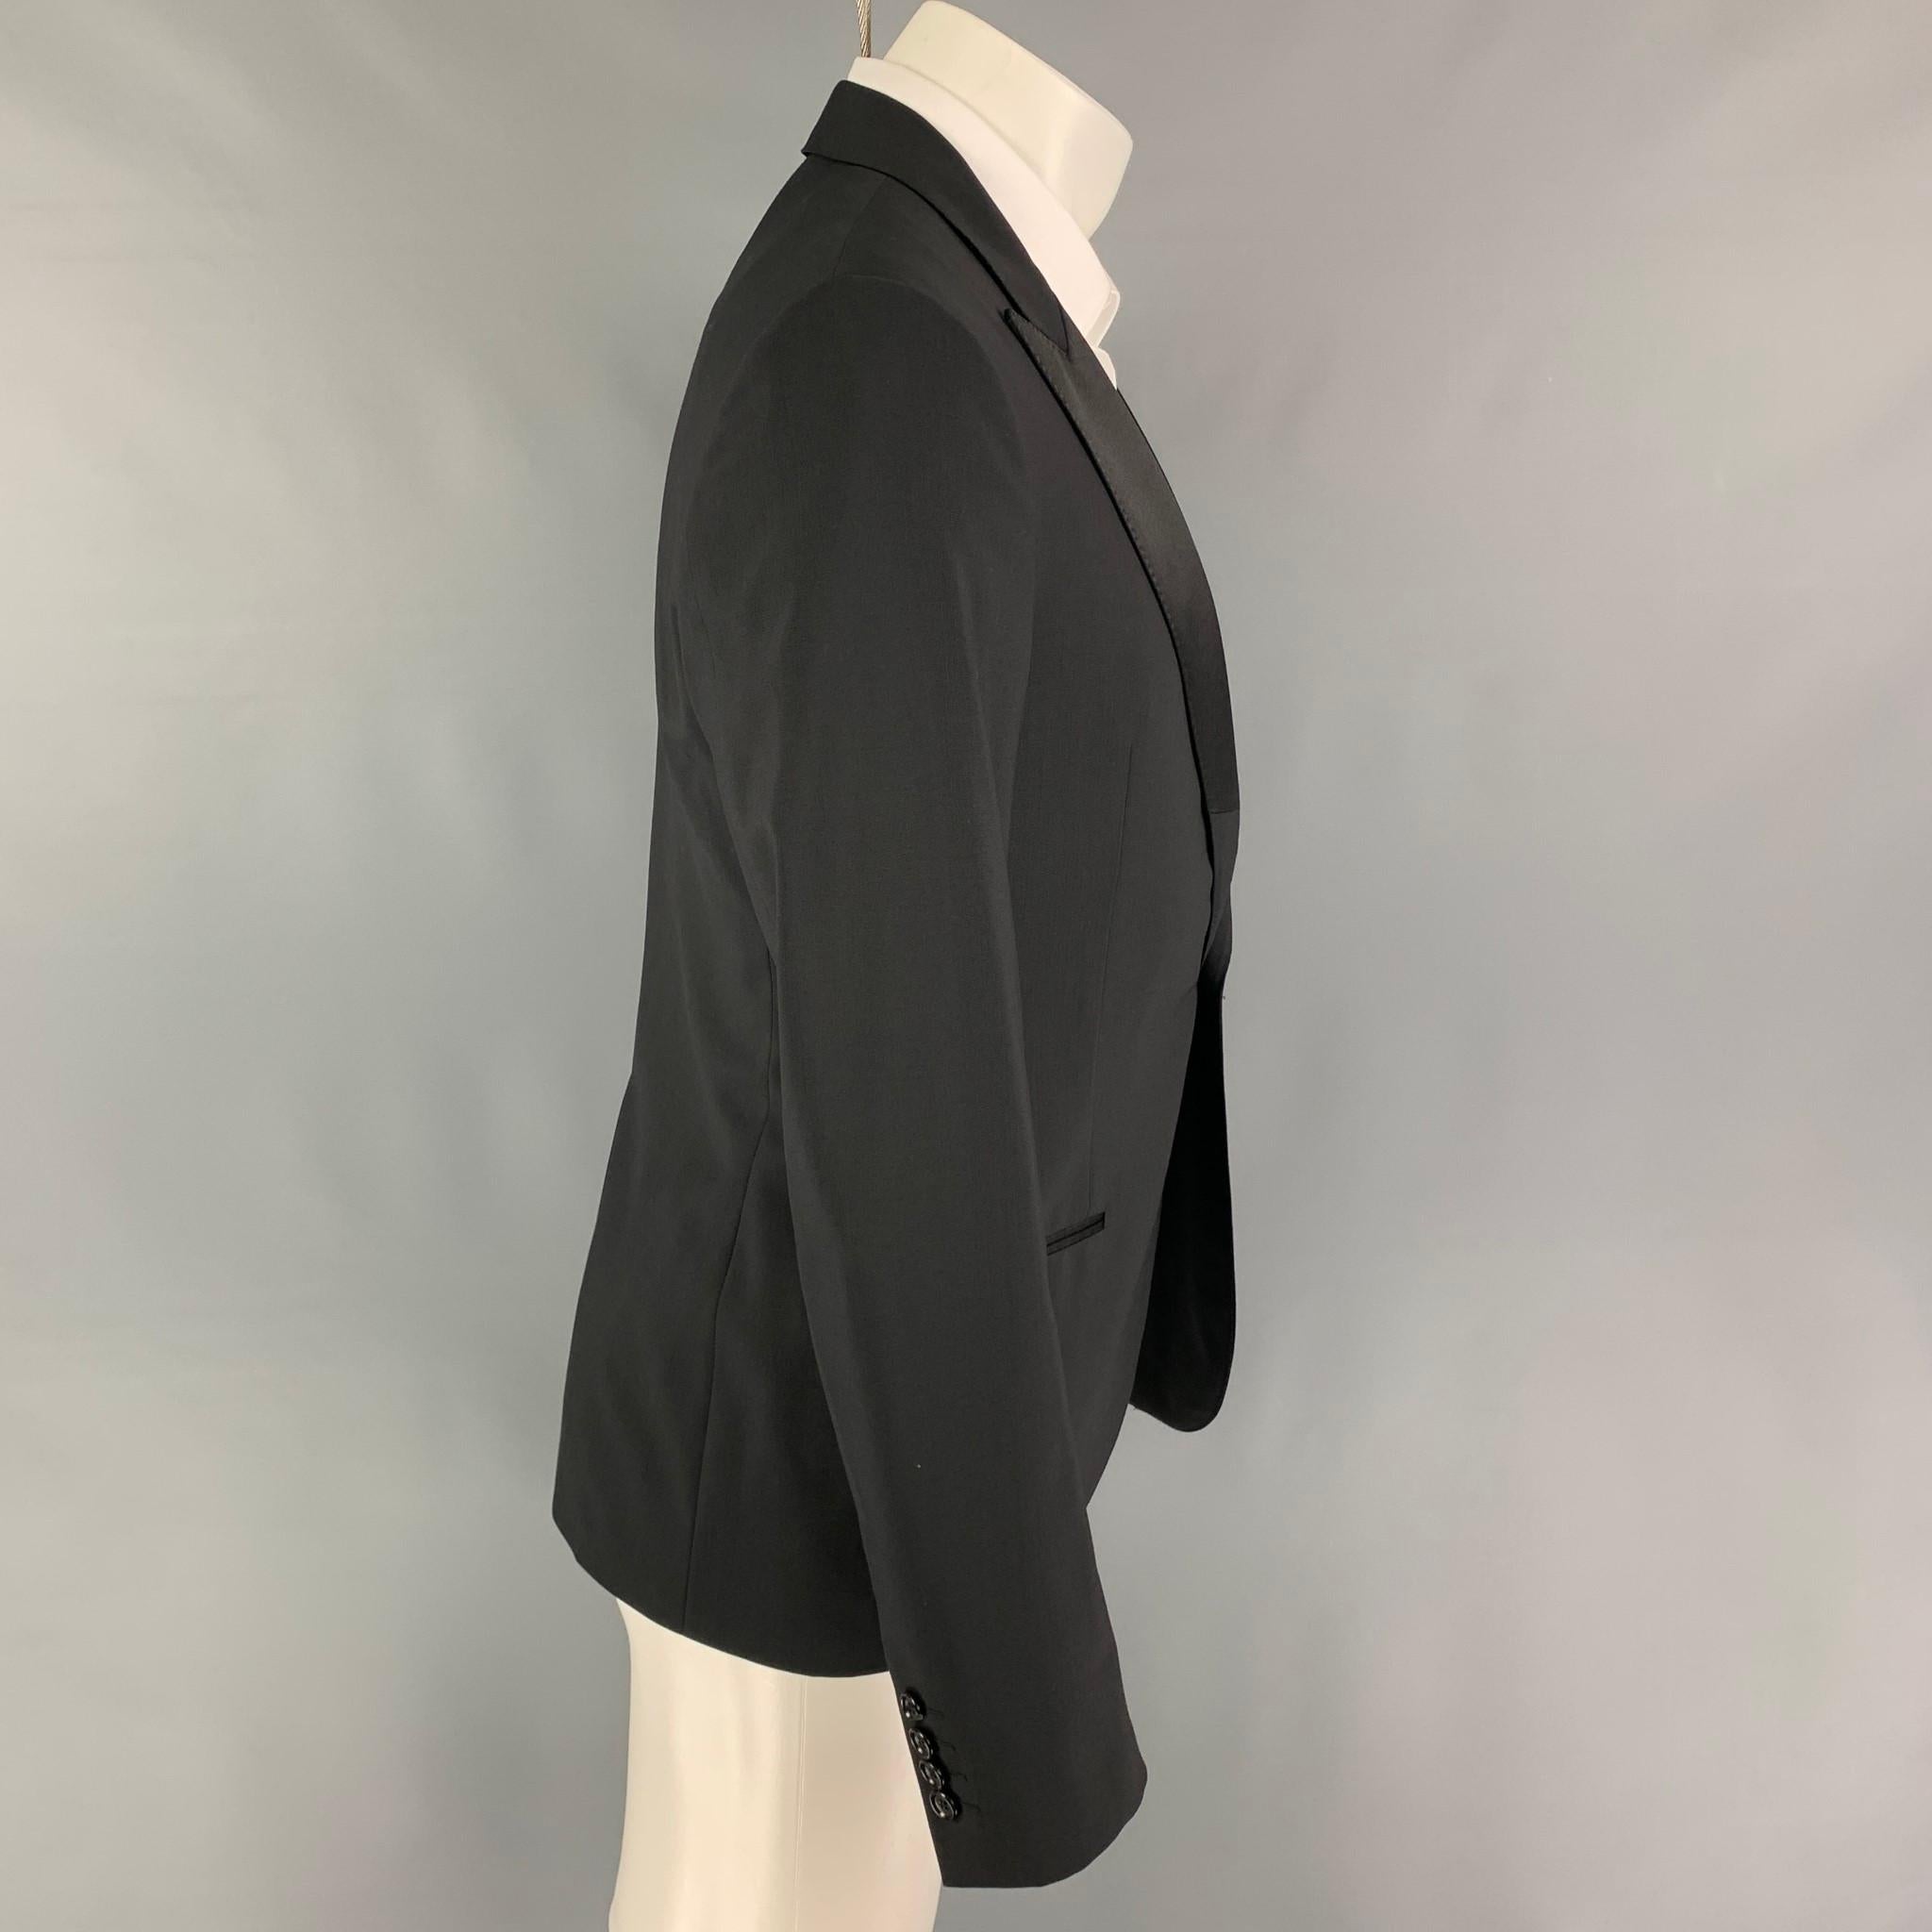 LANVIN sport coat comes in a black wool / lycra with a full liner featuring a peak lapel, slit pockets, single back vent, and a single button closure. 

Excellent Pre-Owned Condition.
Marked: 48 R

Measurements:

Shoulder: 17.5 in.
Chest: 38